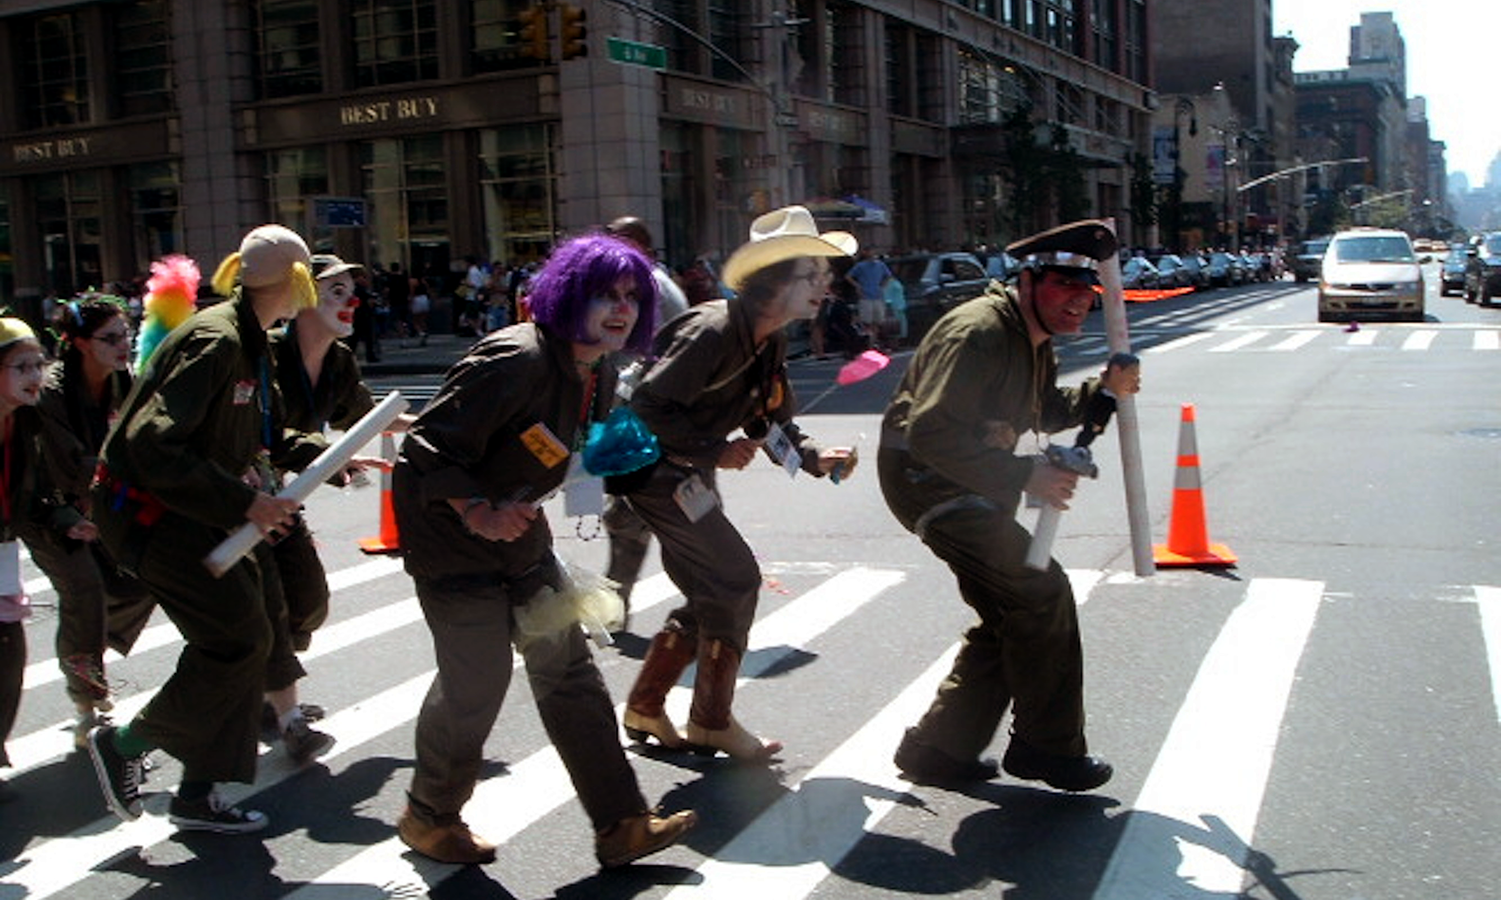 a group of clowns crossing a street